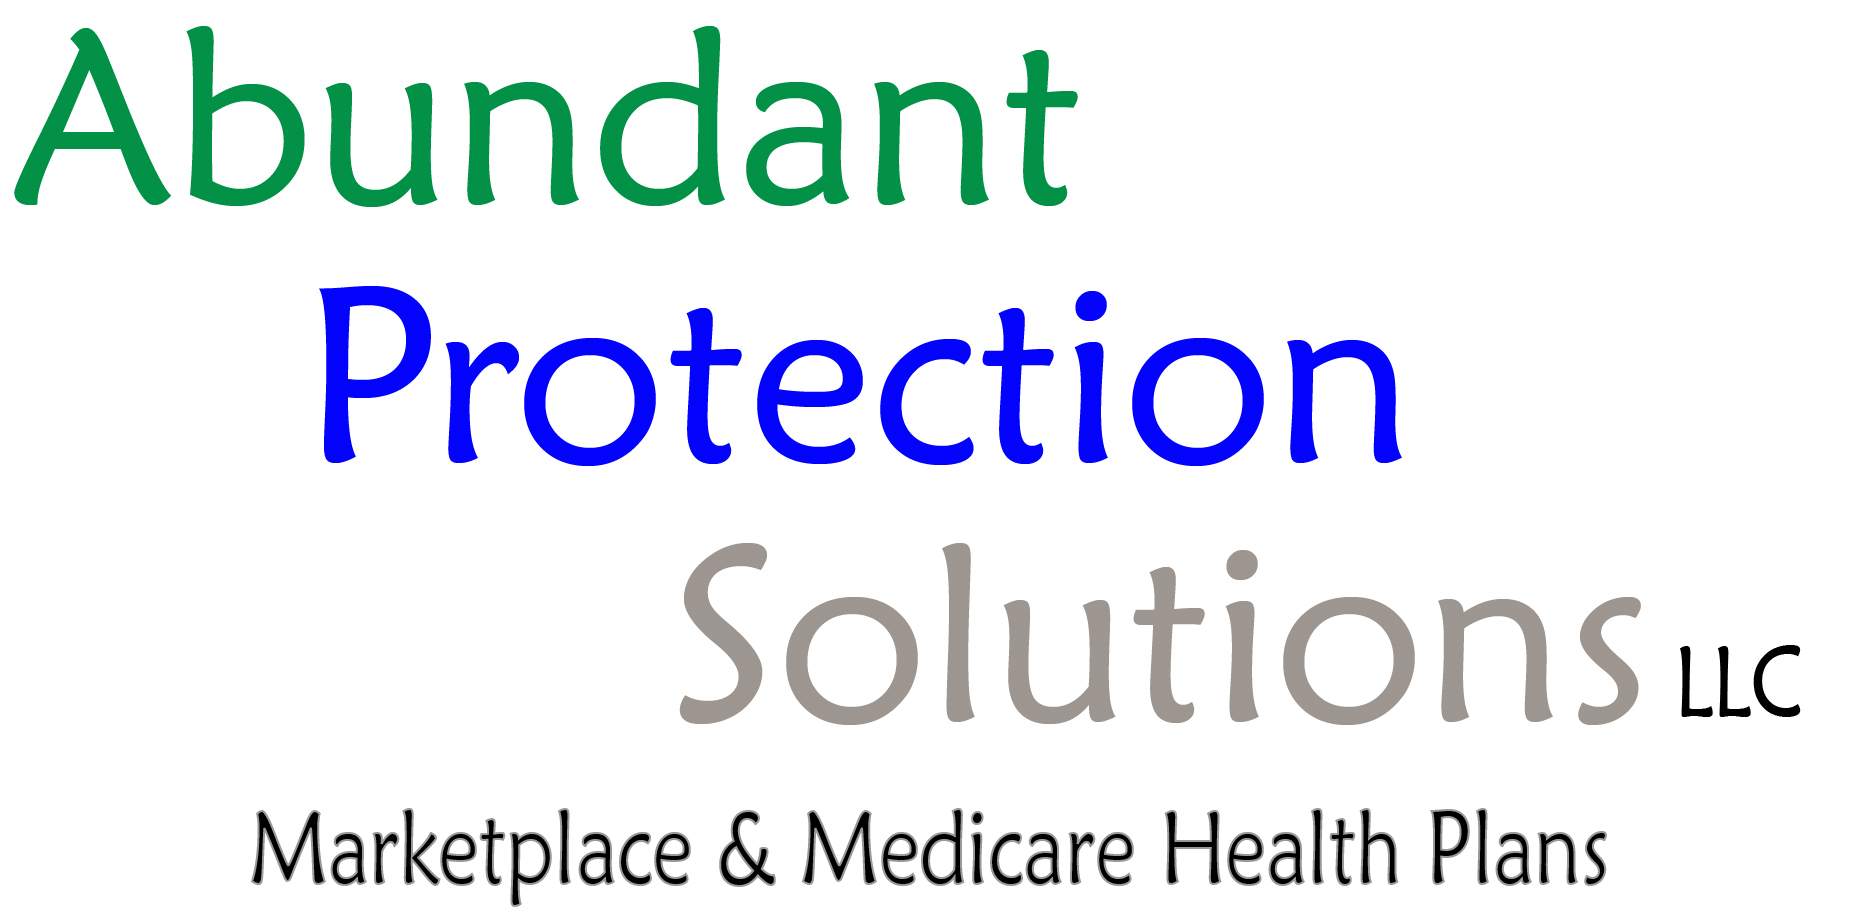 Medicare and Insurance Agent in Texas, Tennesse and Florida / Abundant Protection Solutions, fka Abundant Protection Solutions 